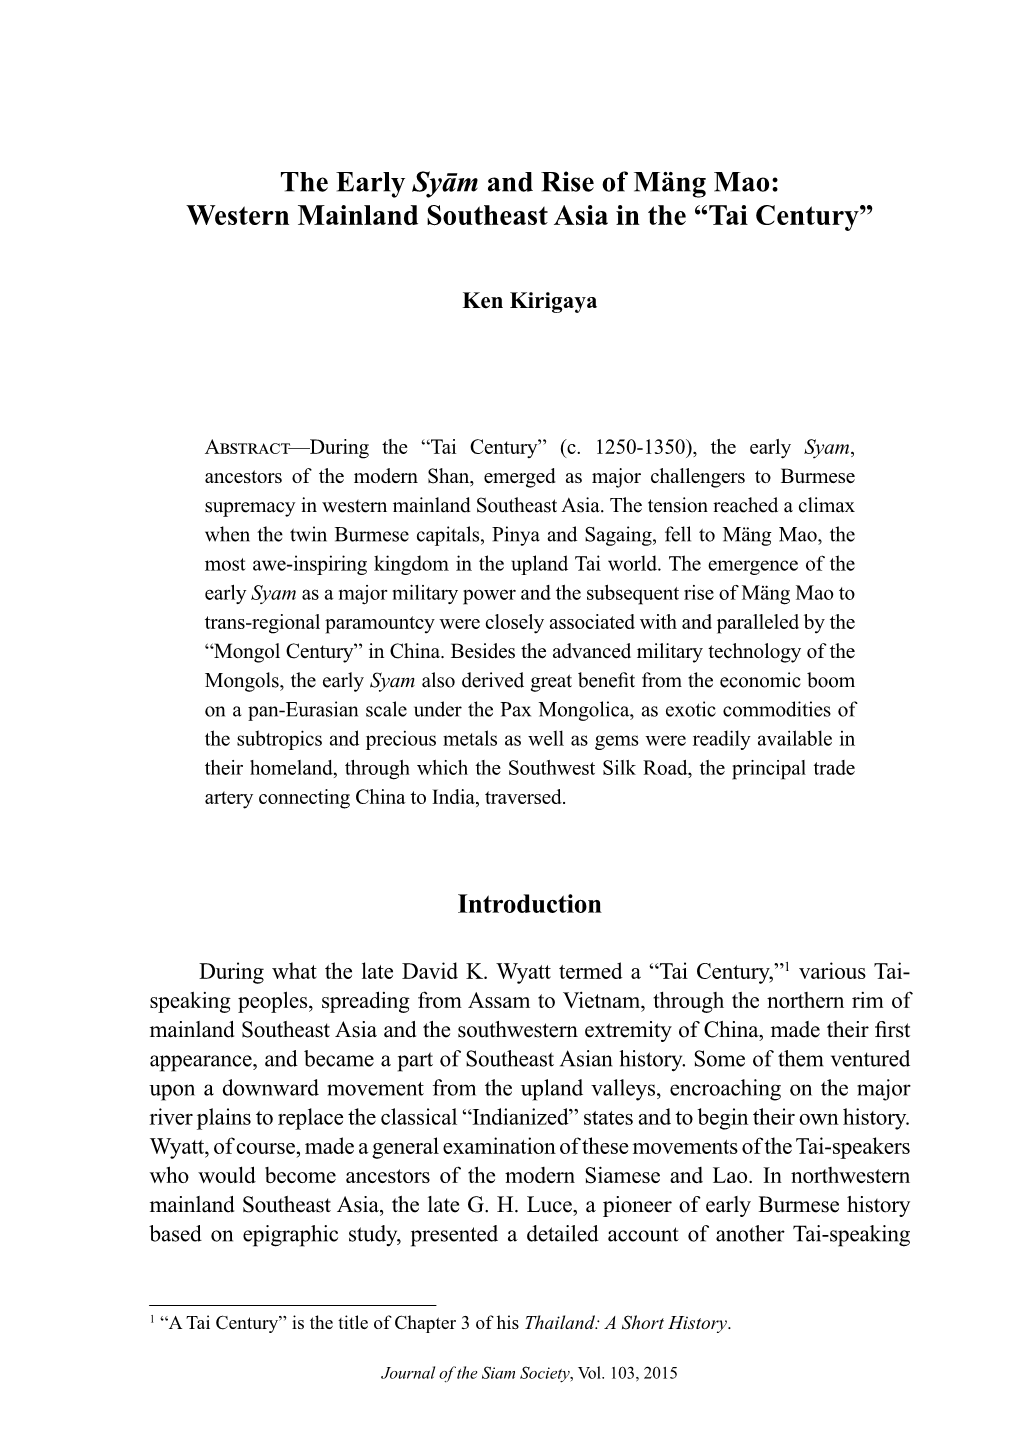 The Early Syām and Rise of Mäng Mao: Western Mainland Southeast Asia in the “Tai Century”